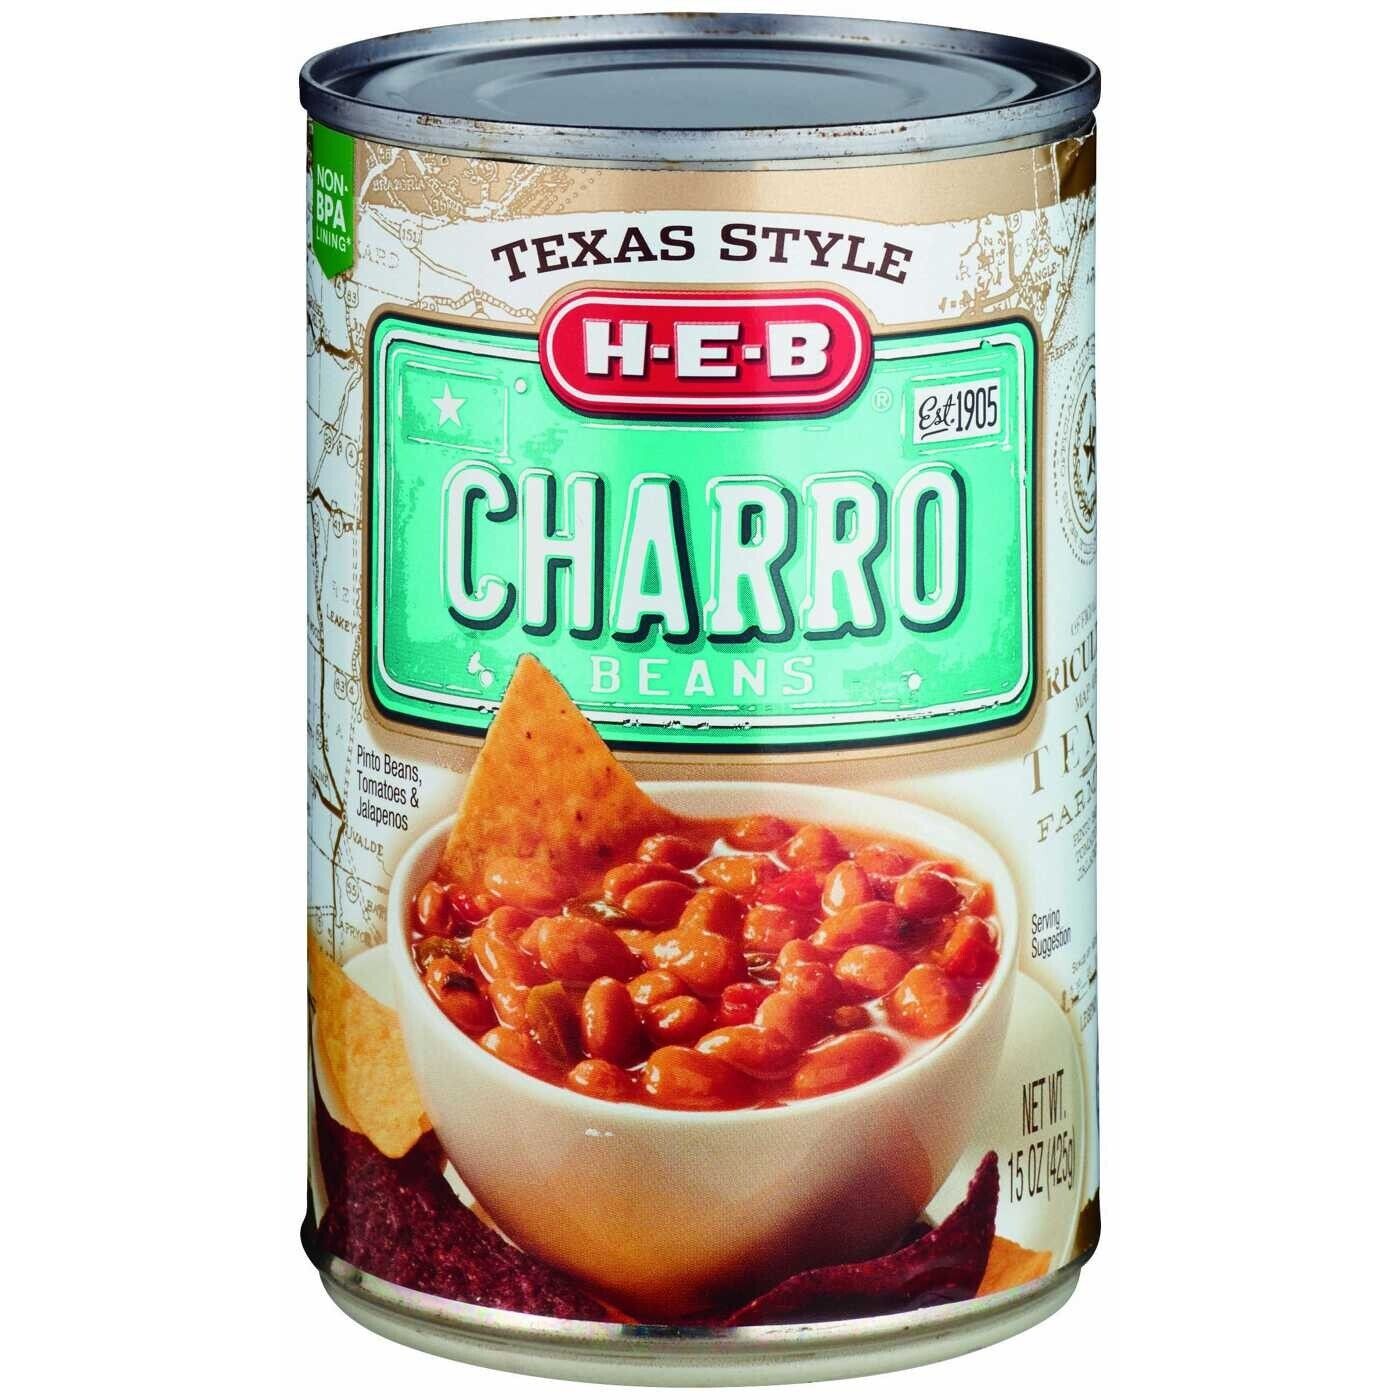 HEB Texas Style Charro Beans 15 oz, 6 Cans - Flavorful Classic Taste